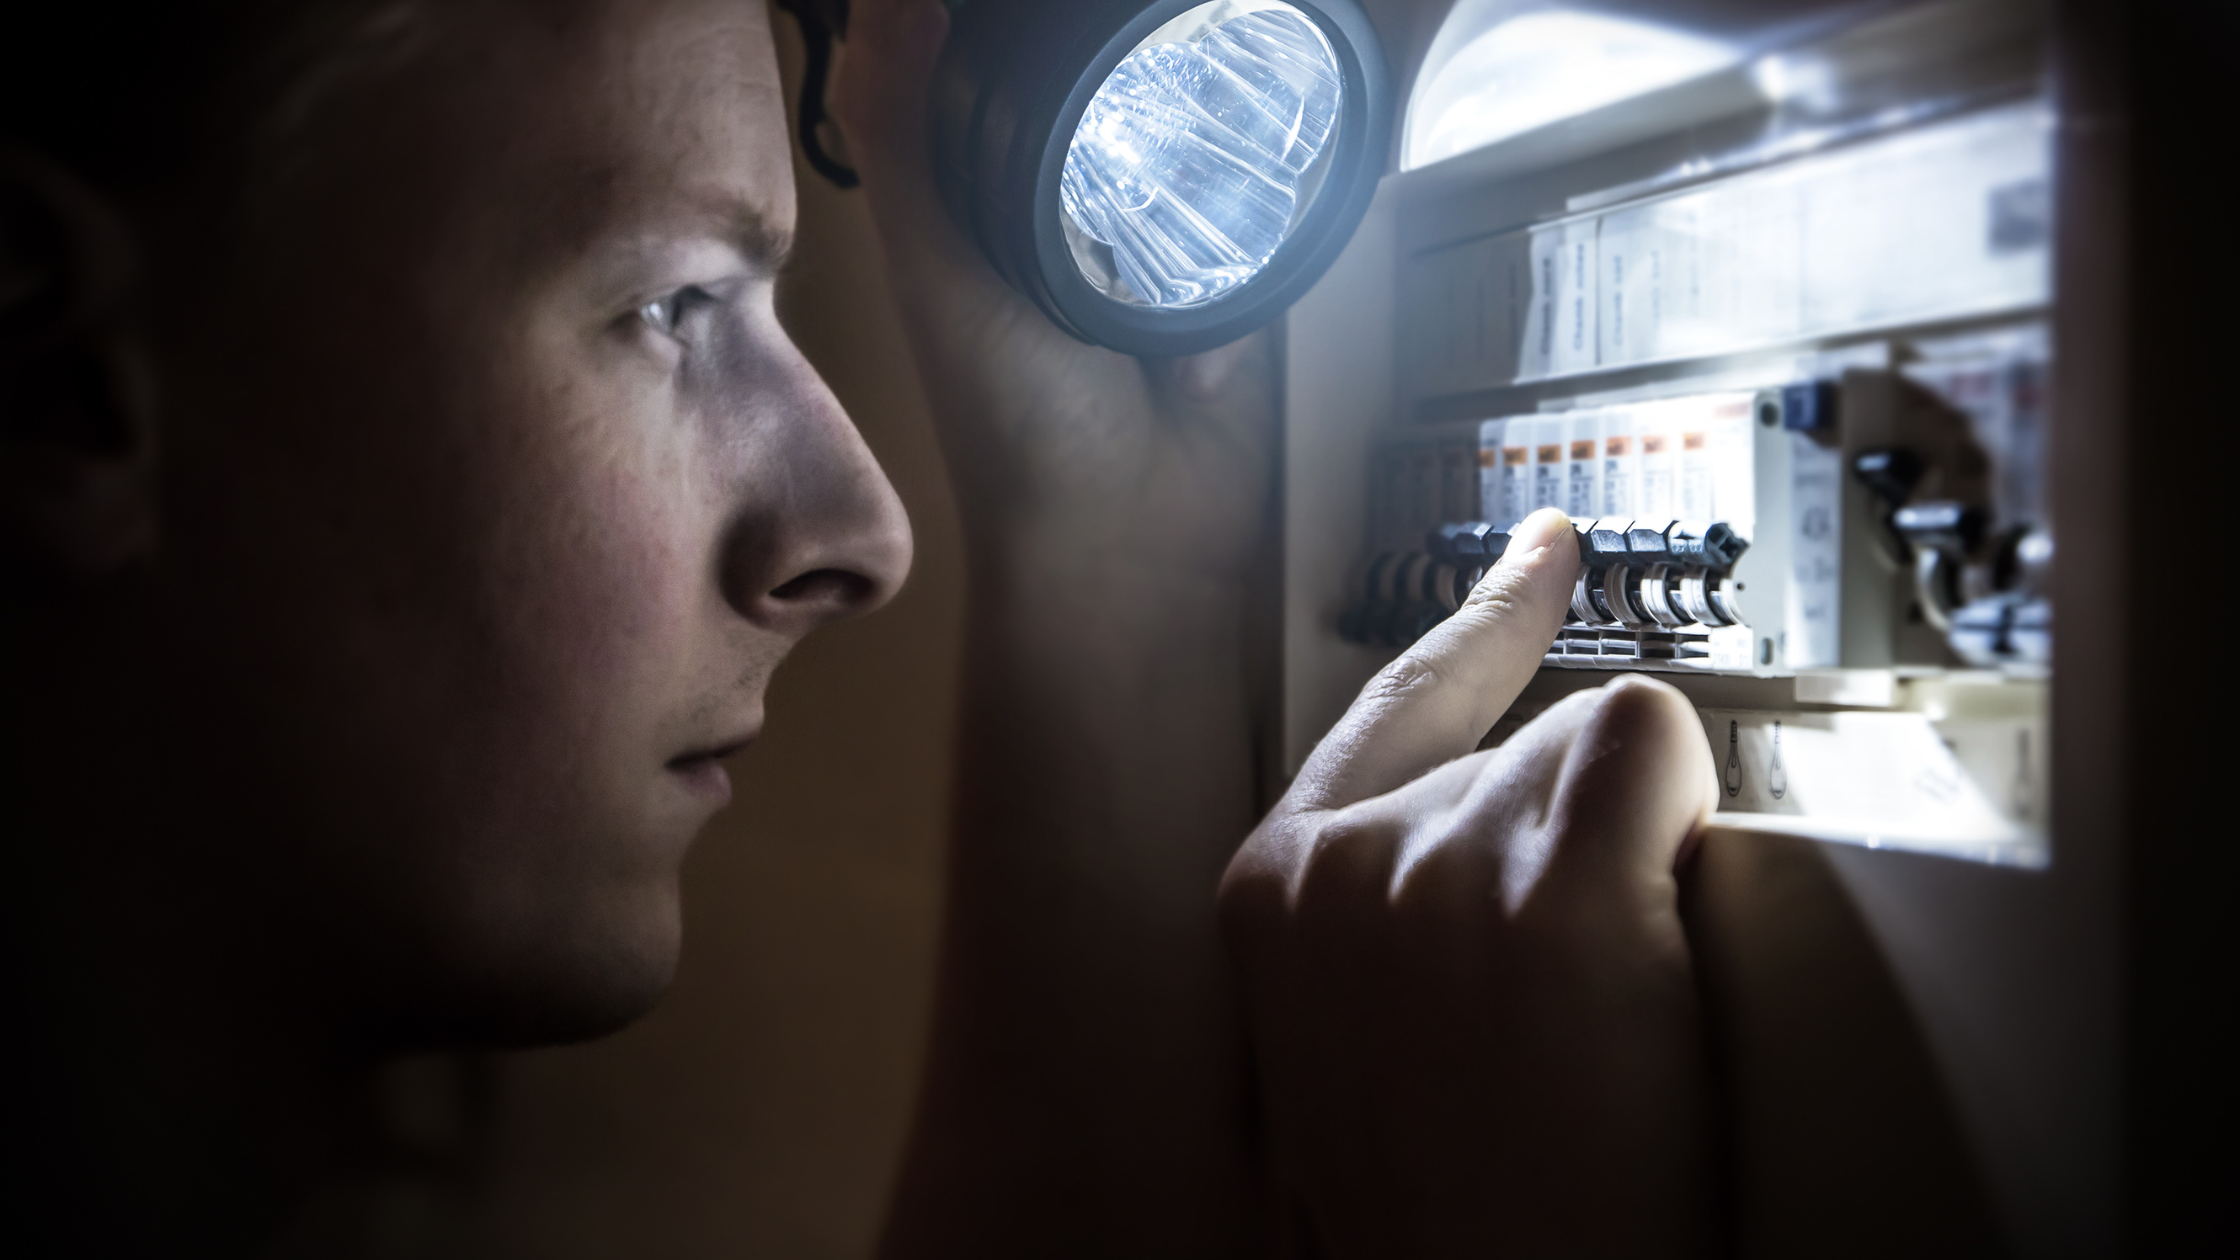 Man checking the distribution board during a power outage